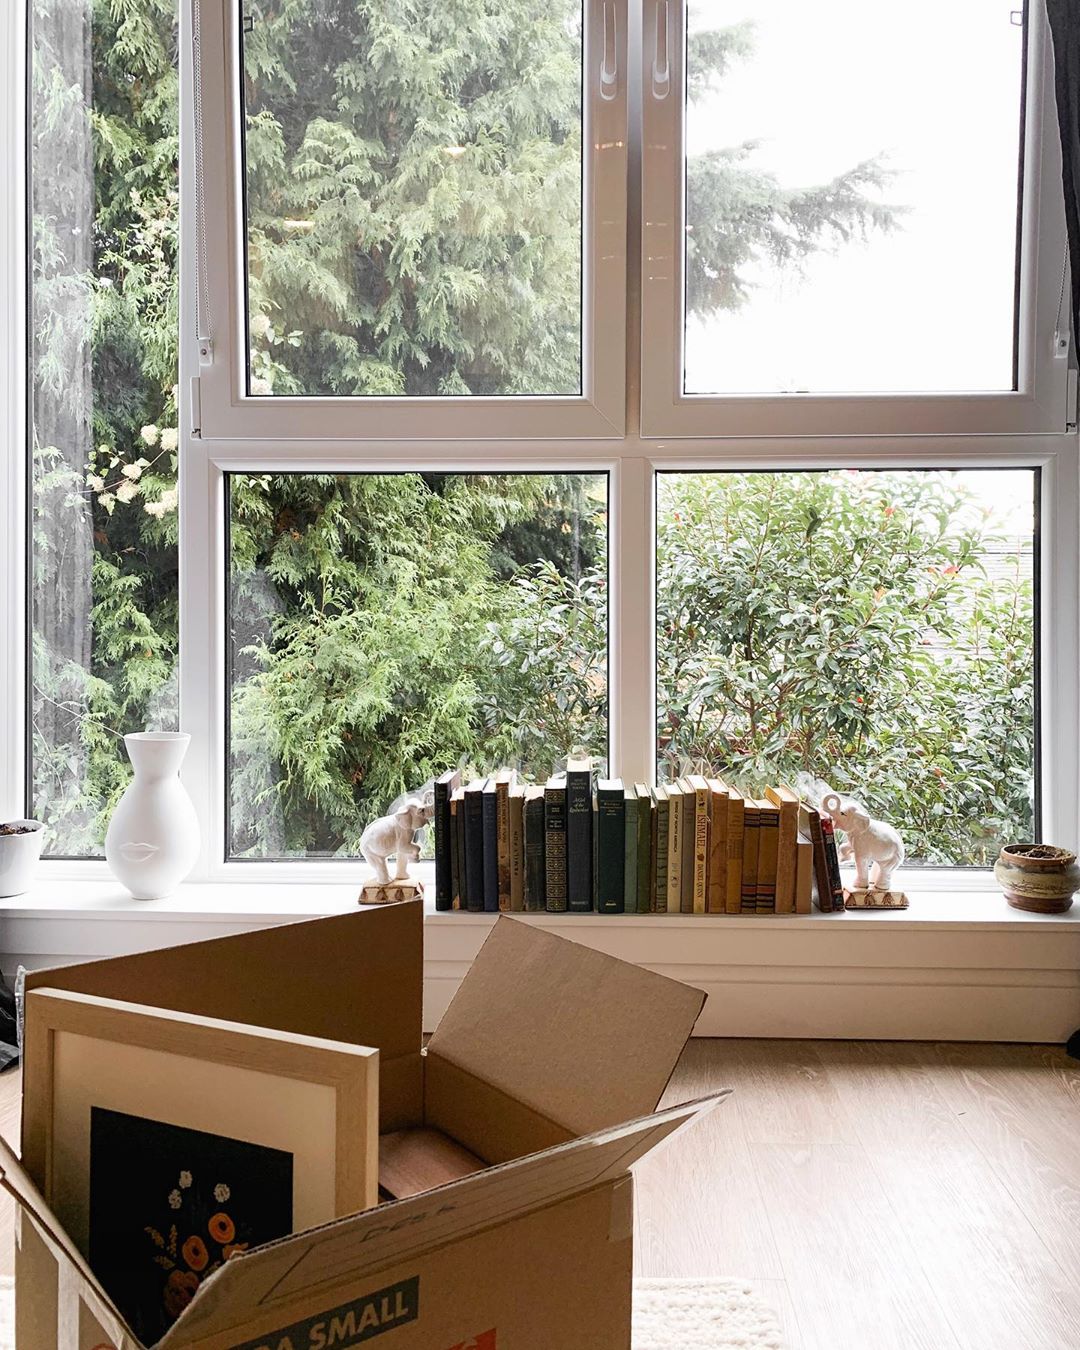 Smart Tips to Maximize Small Spaces